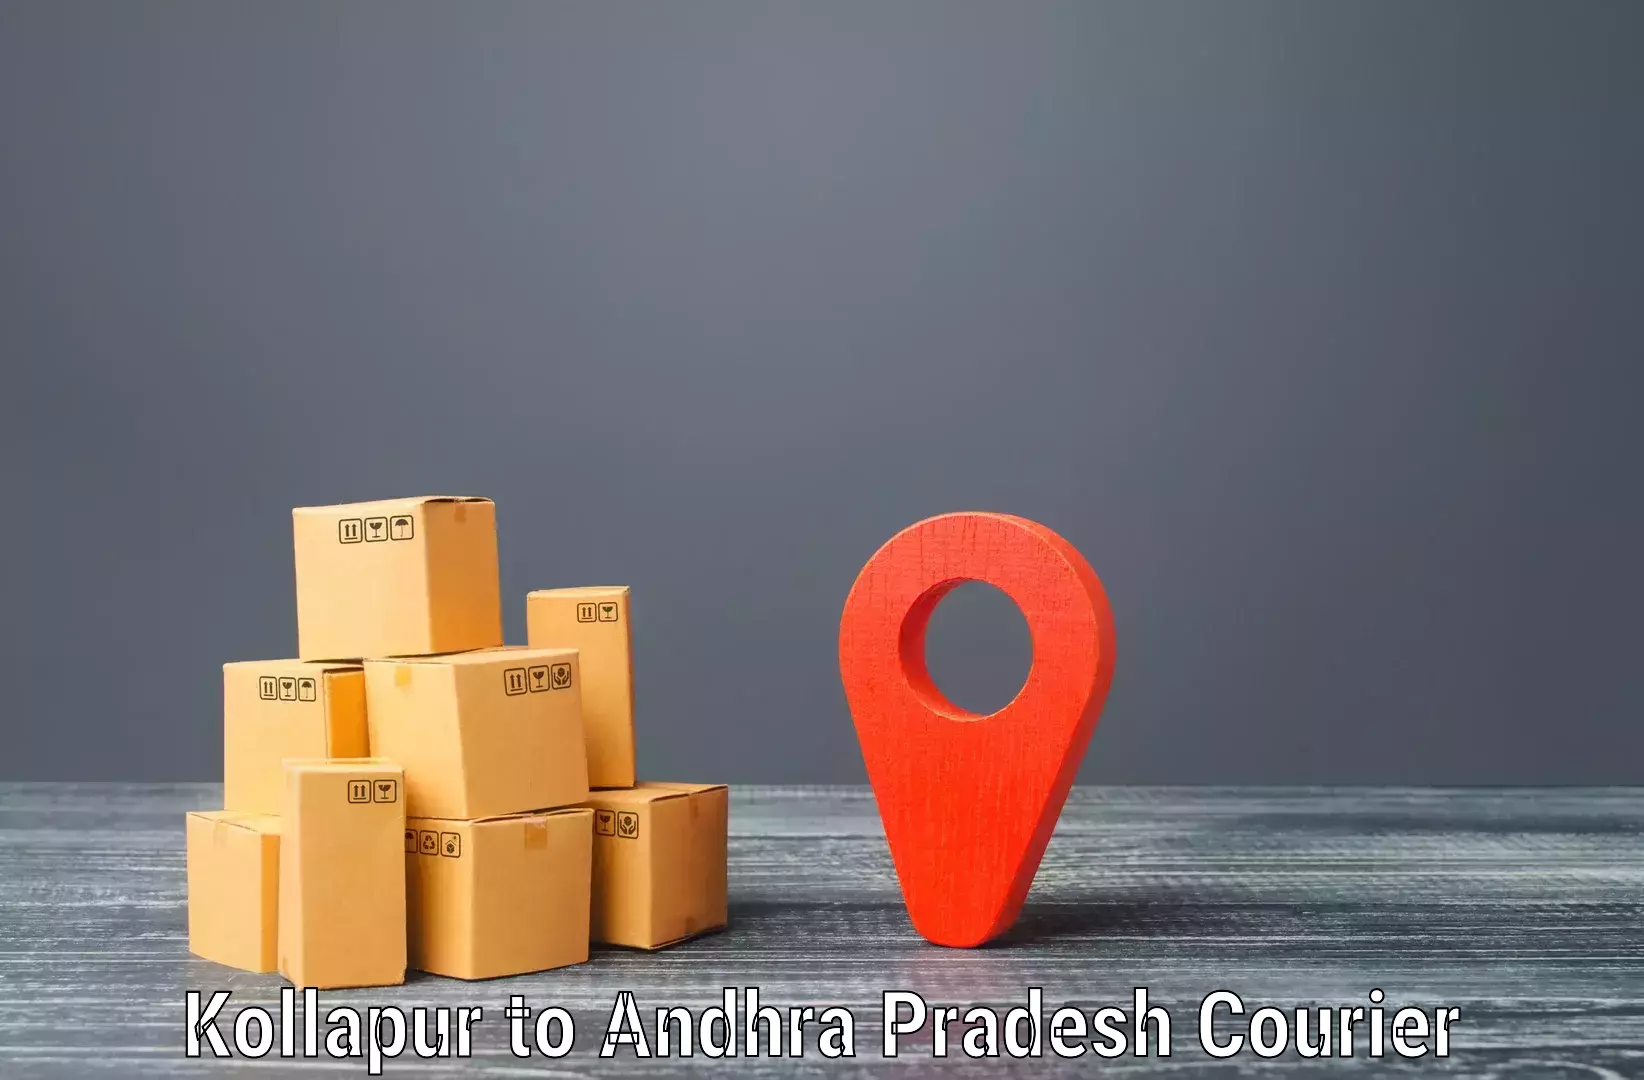 Specialized courier services Kollapur to Addateegala